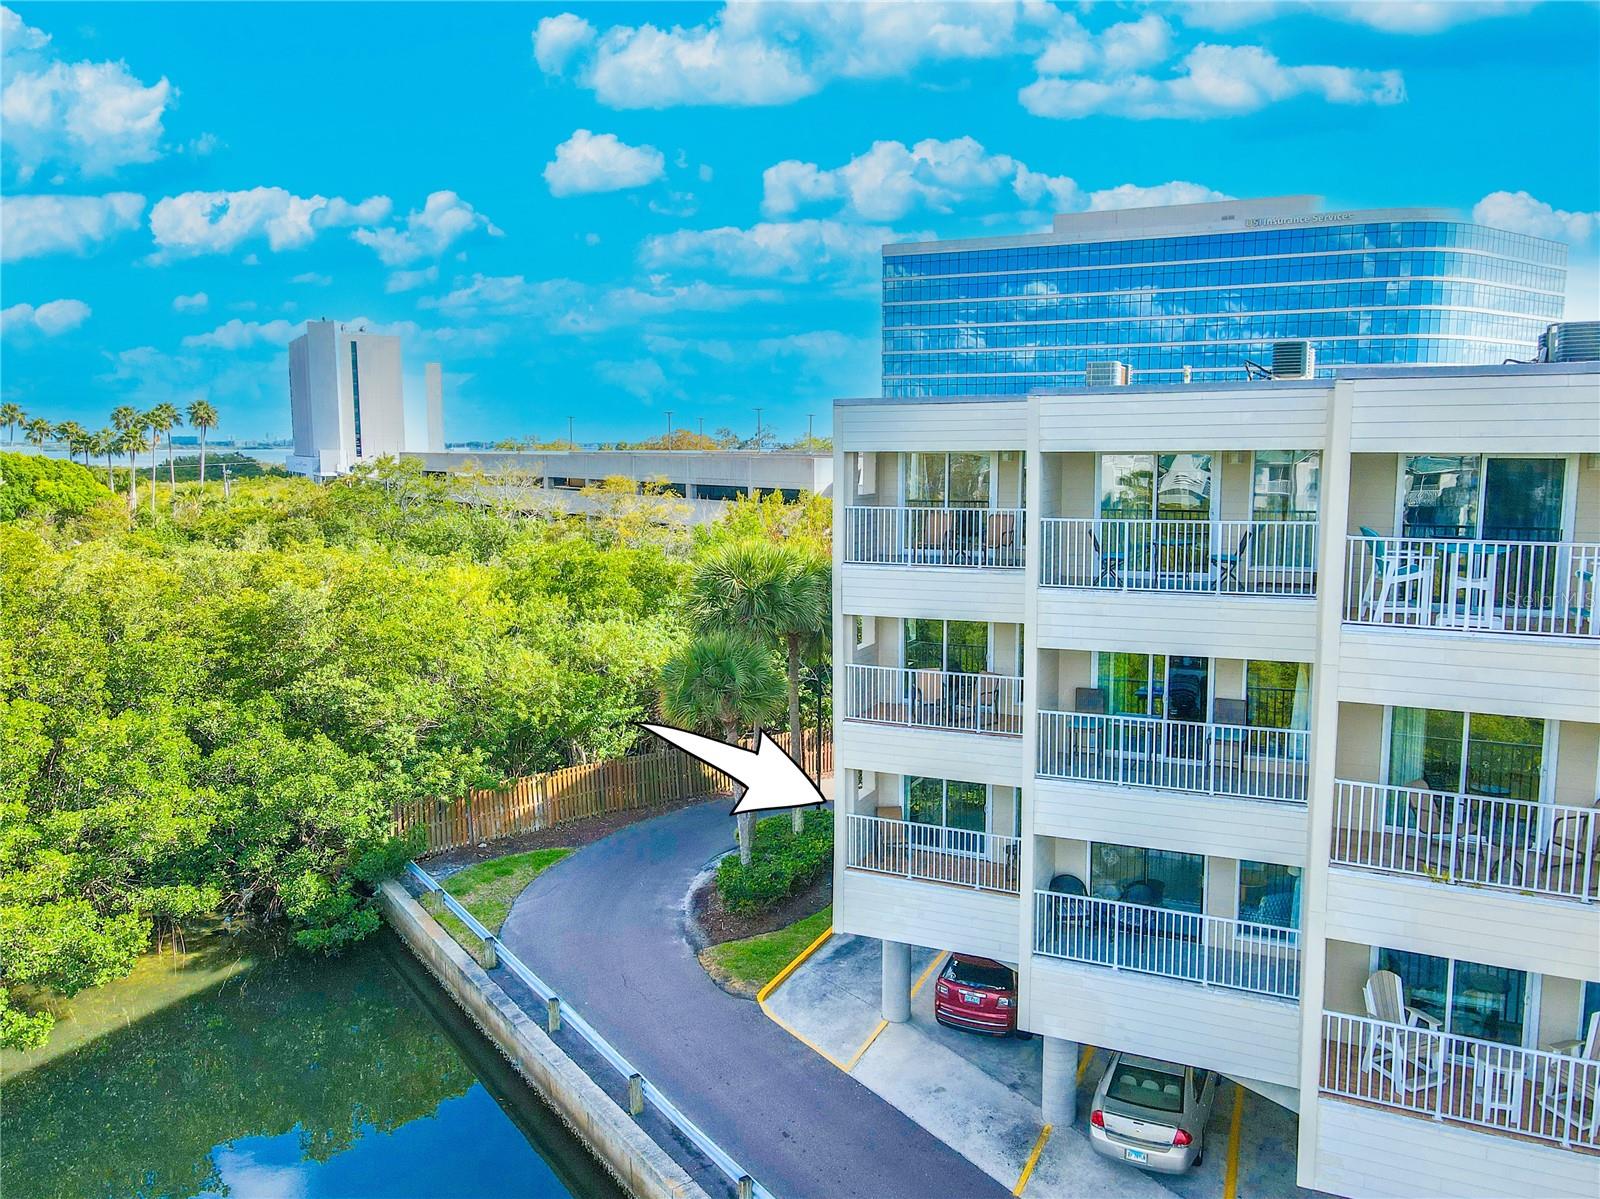 Rare 2-bedroom, 2-Bath unit with private waterview balcony